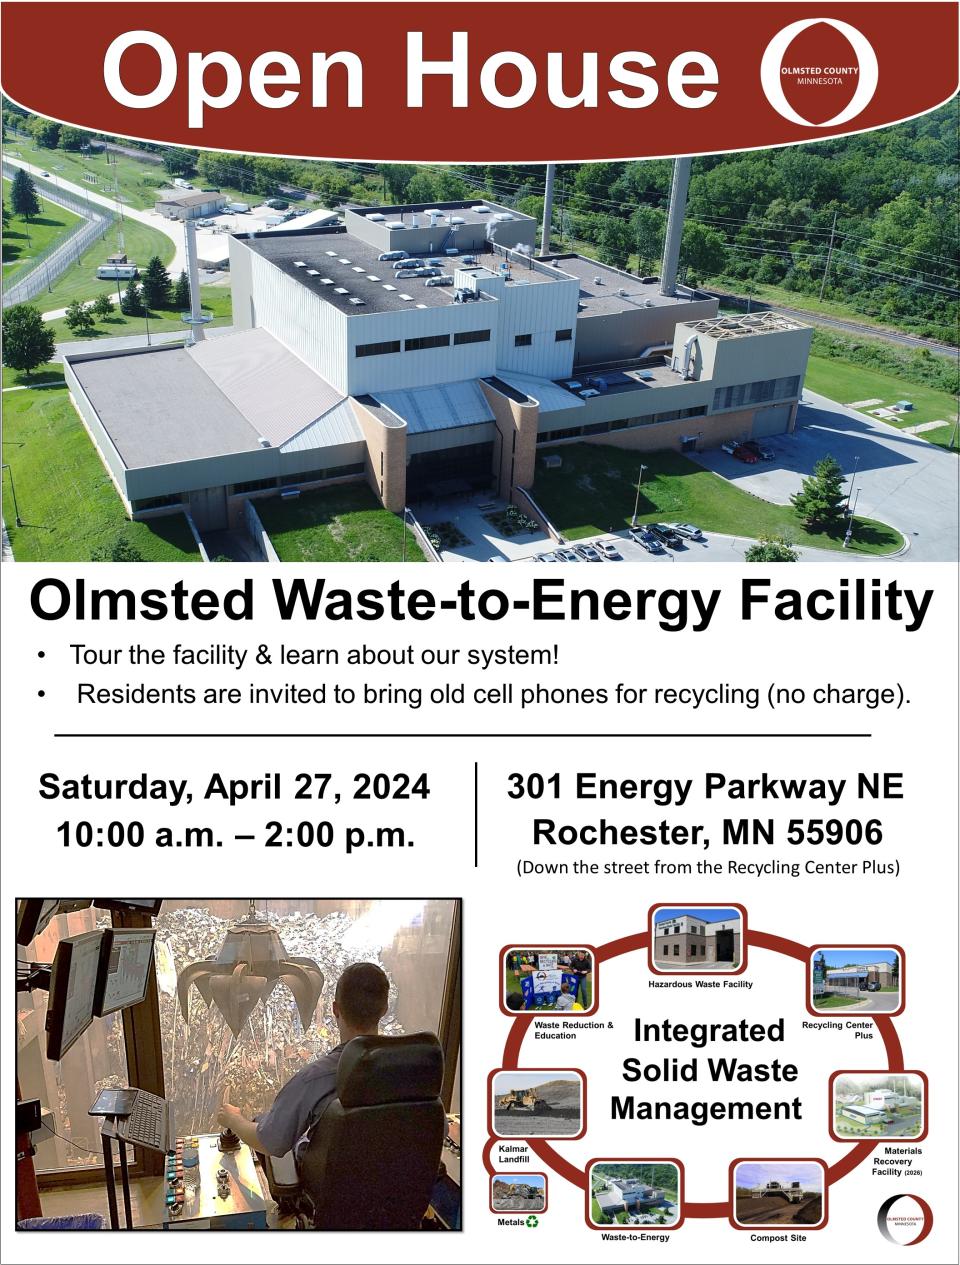 Promotion for Olmsted Waste-to-Energy Facility Open House